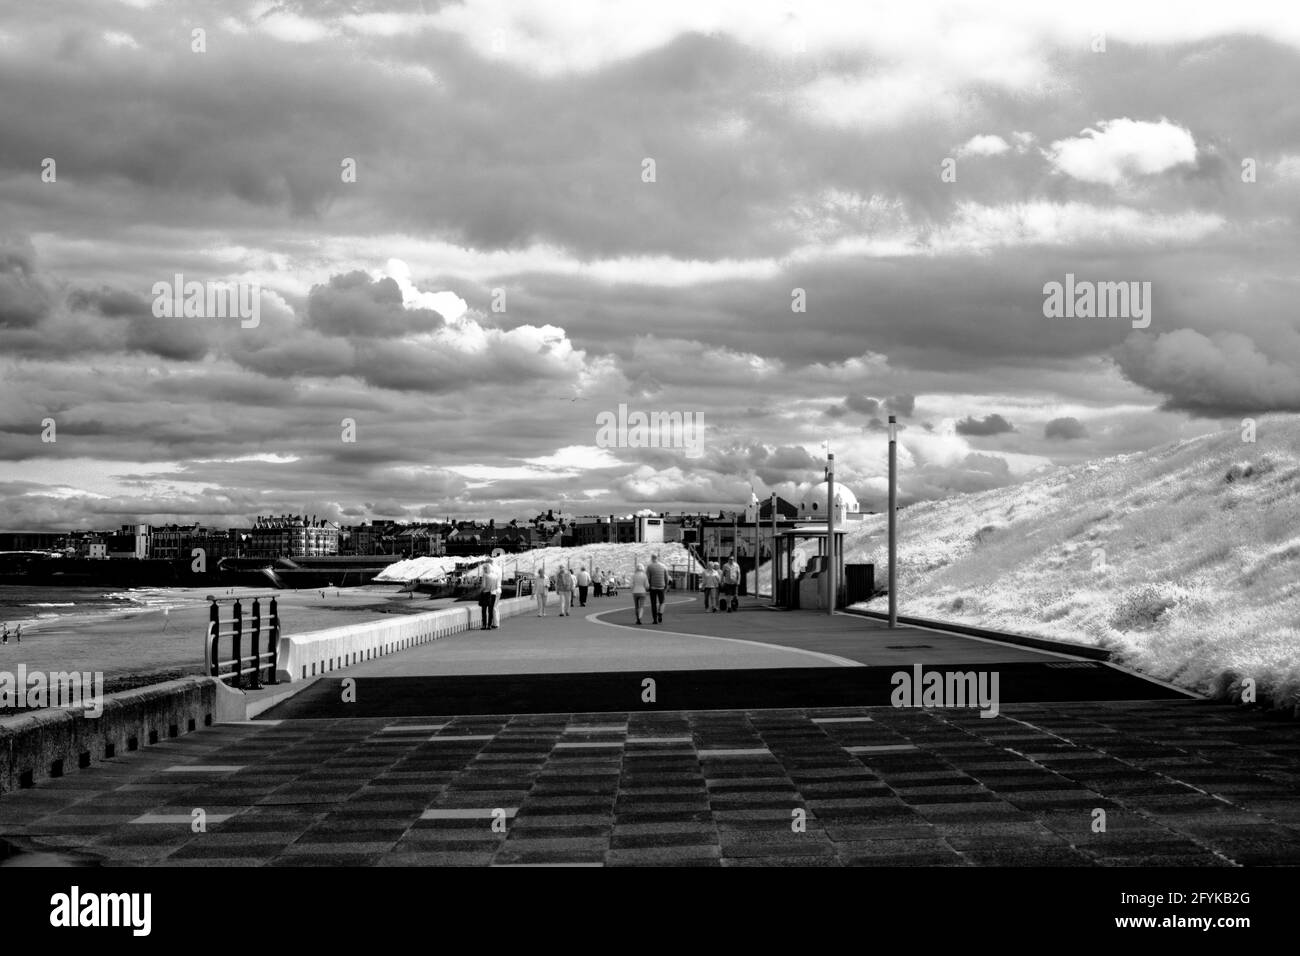 Whitley Bay promenade in England UK by infrared light Stock Photo